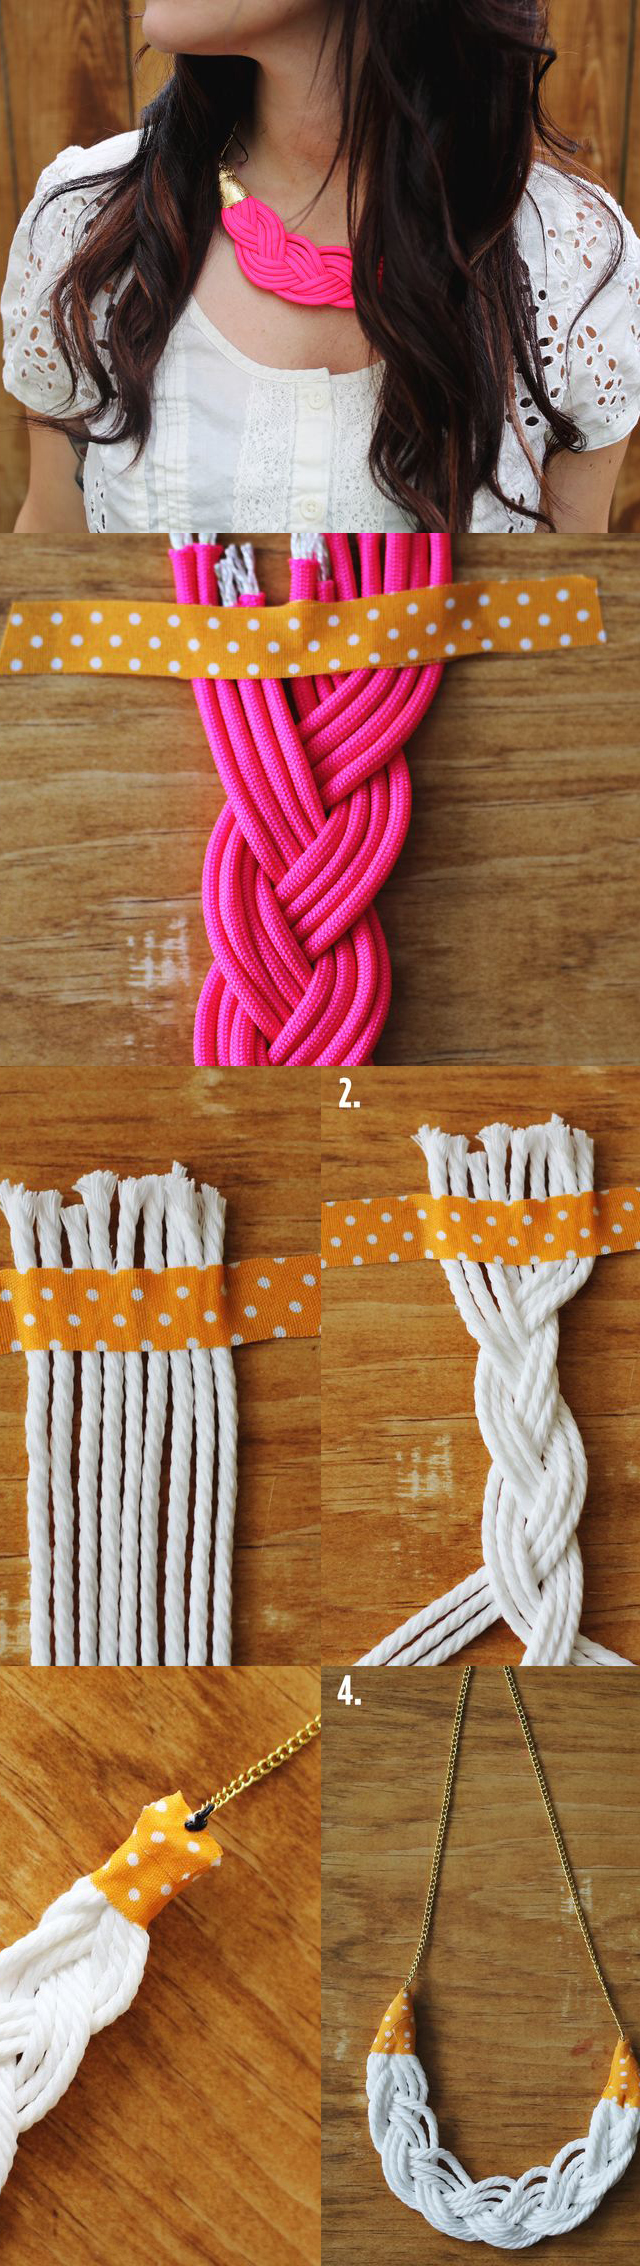 Braided Rope Necklace Tutorial